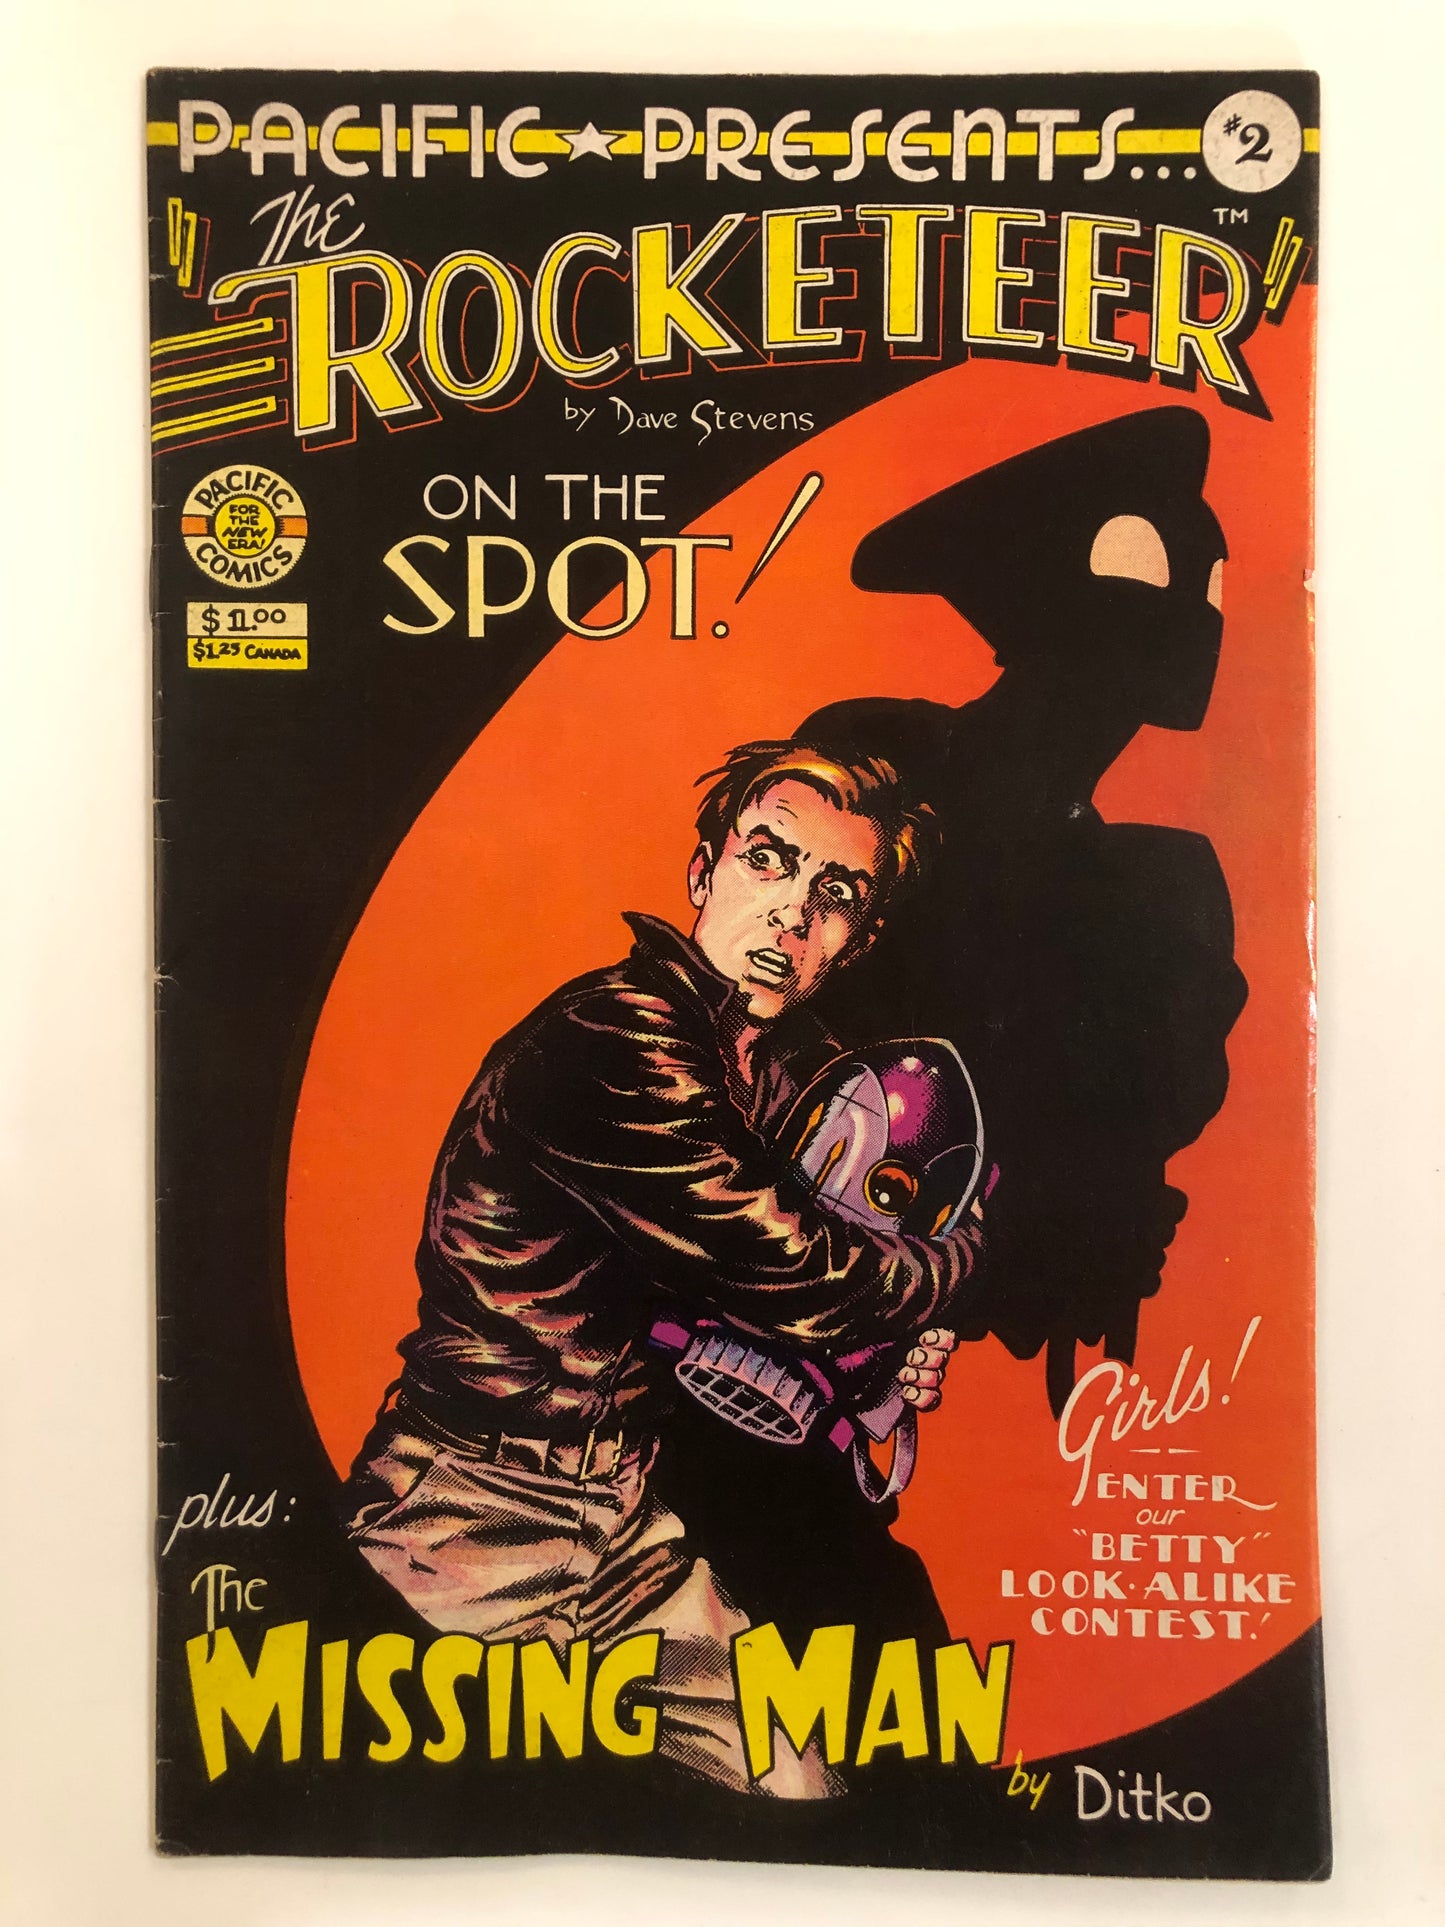 The Rocketeer #1 and #2